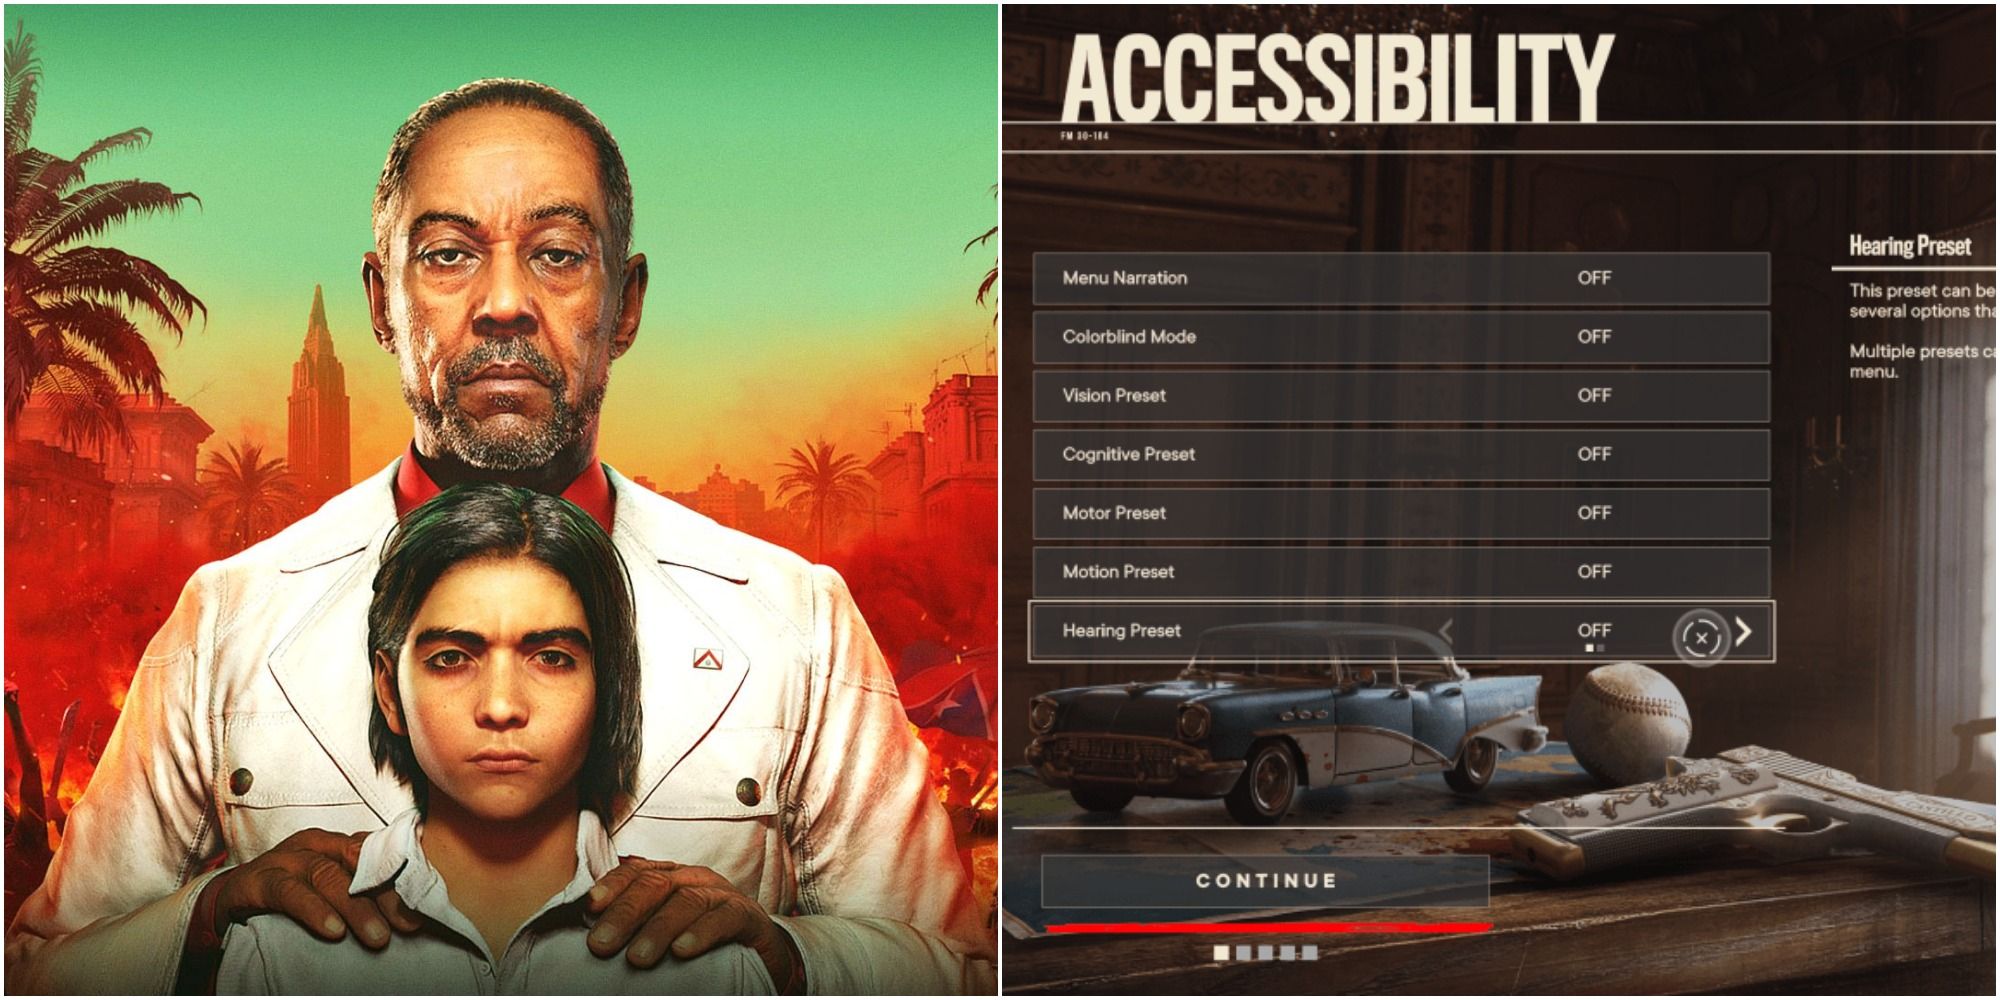 A split image of the Far Cry 6 title art with Anton Castillo standing behind his son Diego, next to a still of the accessibility settings